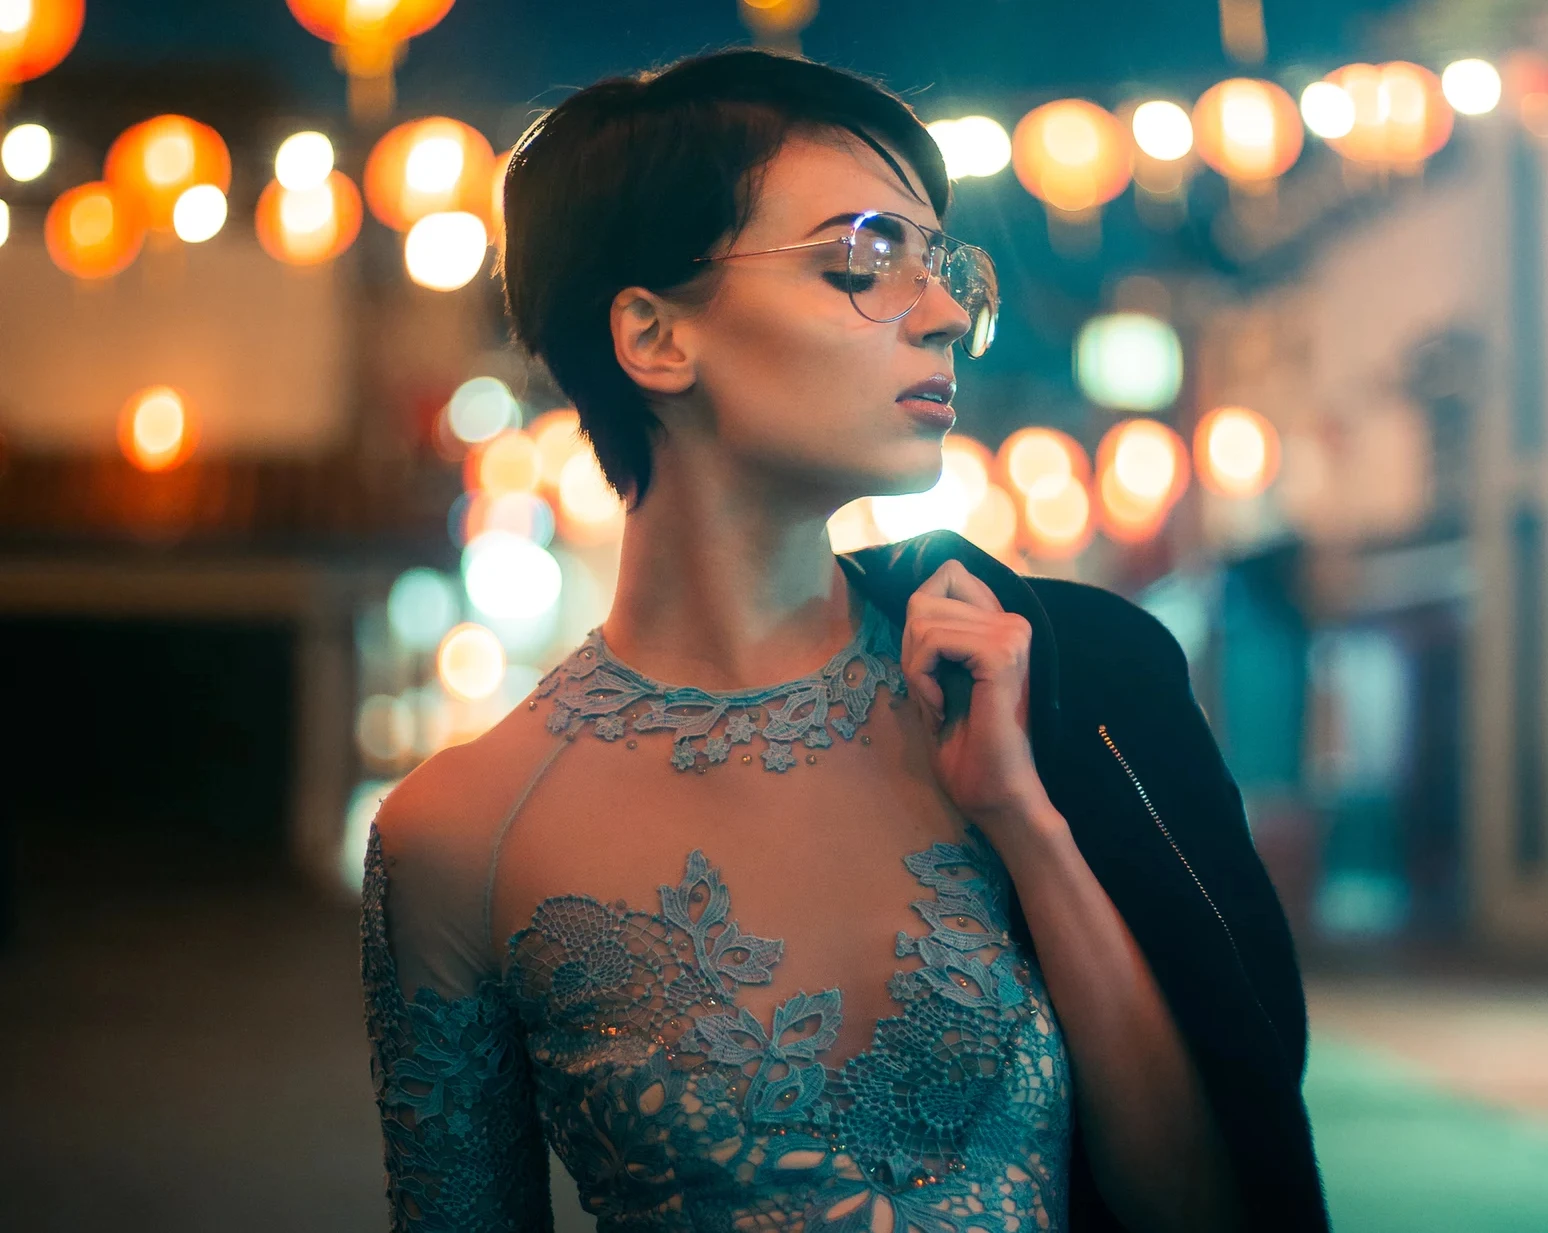 beautiful woman with a styled pixie haircut in a prom dress